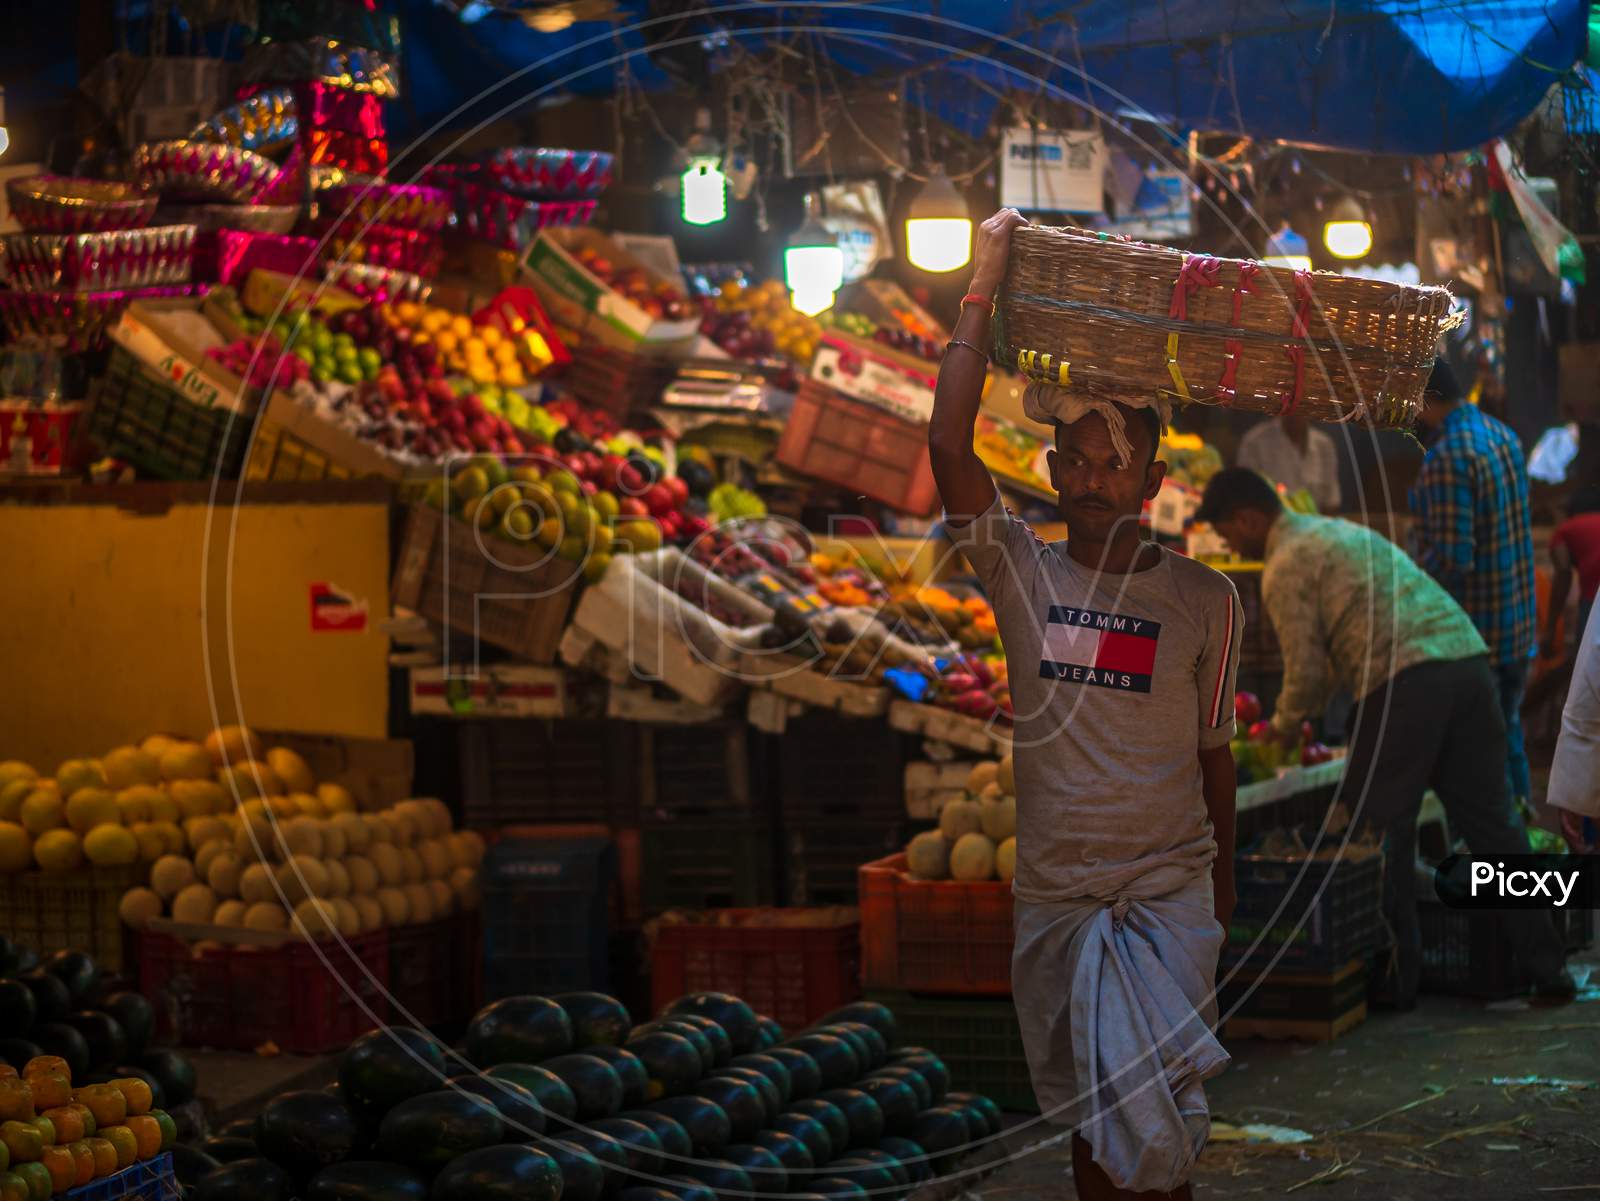 A Porter Carrying Empty Cart In Fruit Market In South Mumbai